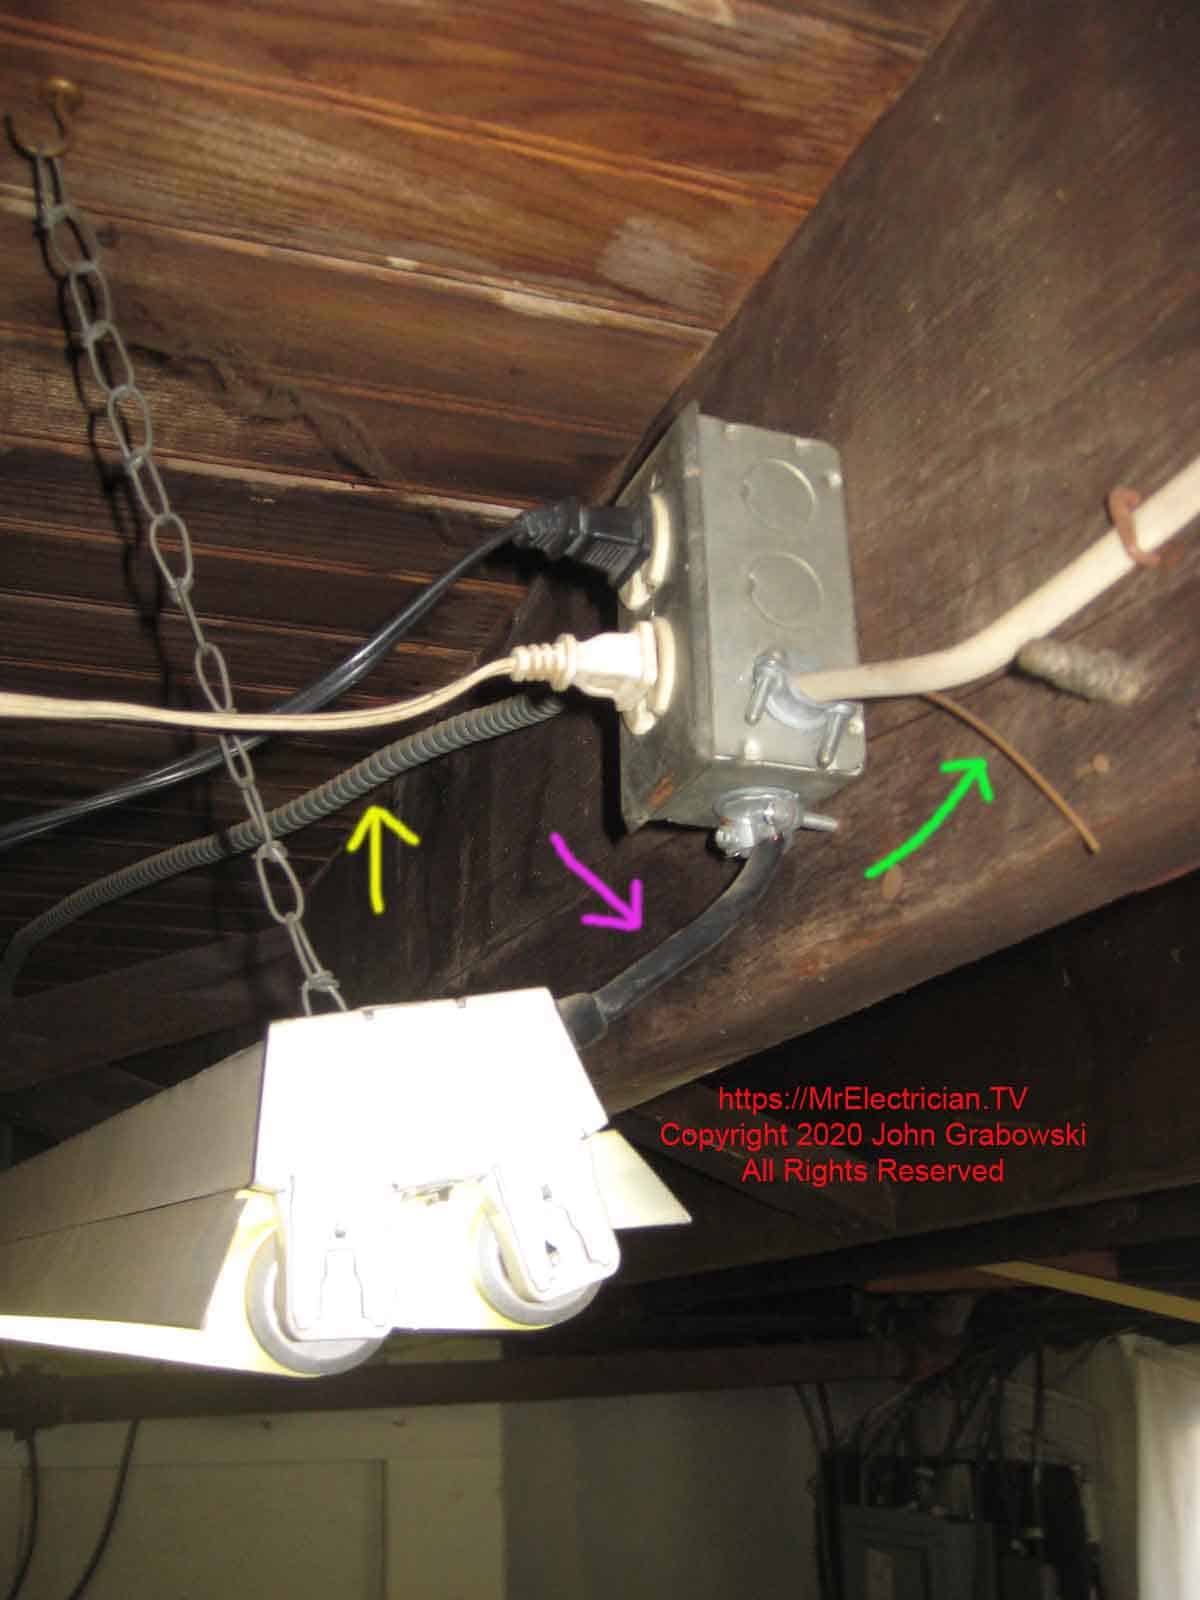 Basement light fixture wired wrong through electrical outlet